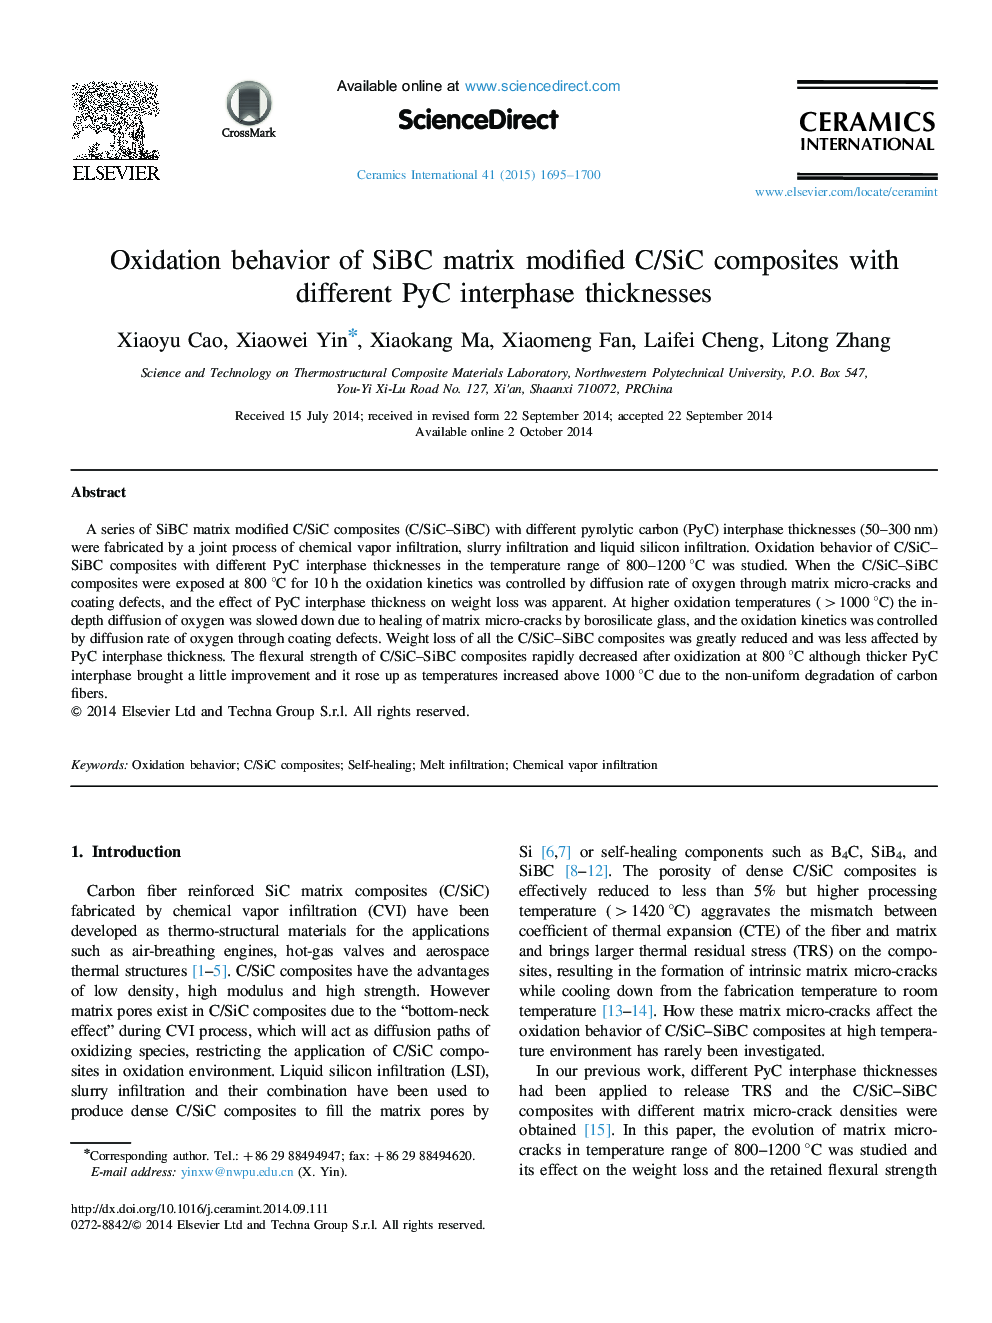 Oxidation behavior of SiBC matrix modified C/SiC composites with different PyC interphase thicknesses